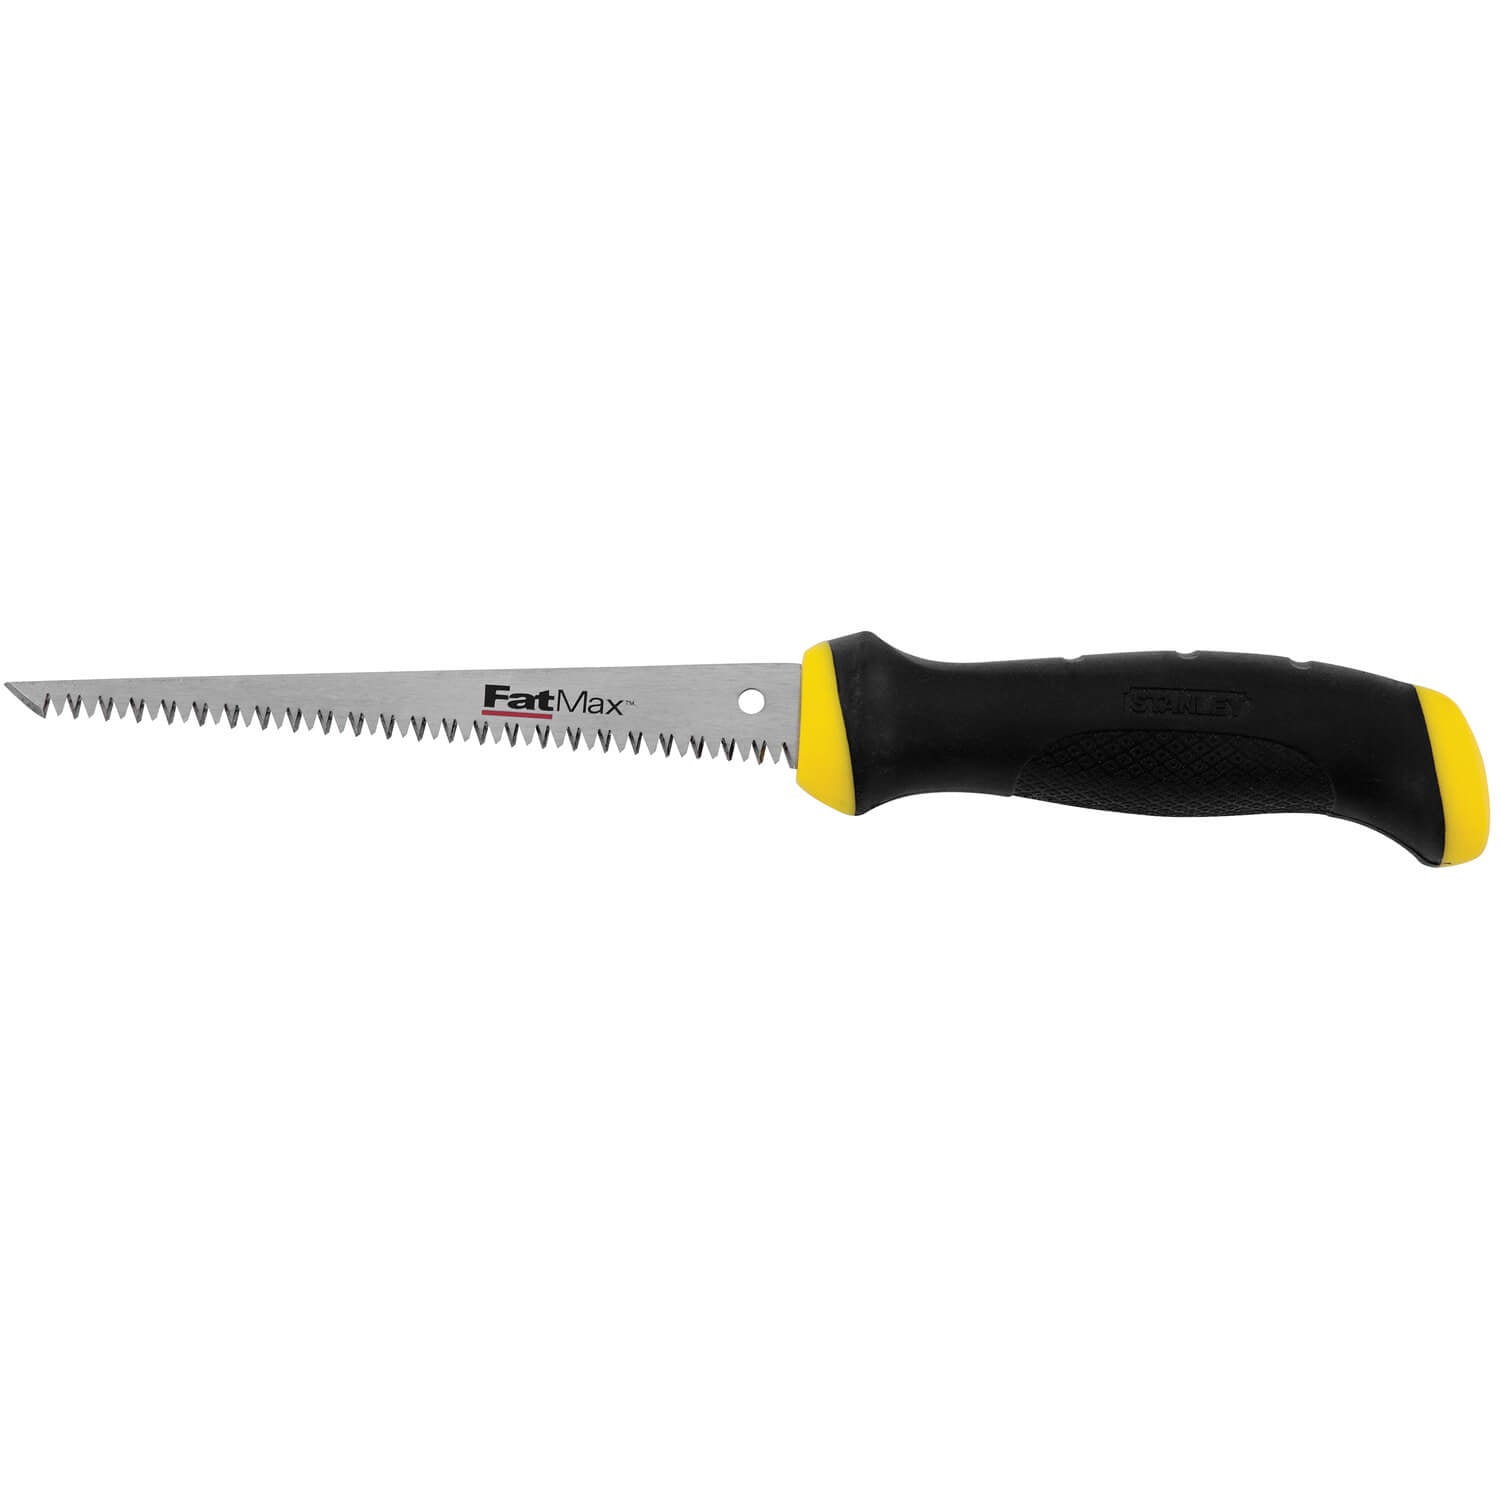 STANELY  20-556  -  6 IN FATMAX® JAB SAW - wise-line-tools